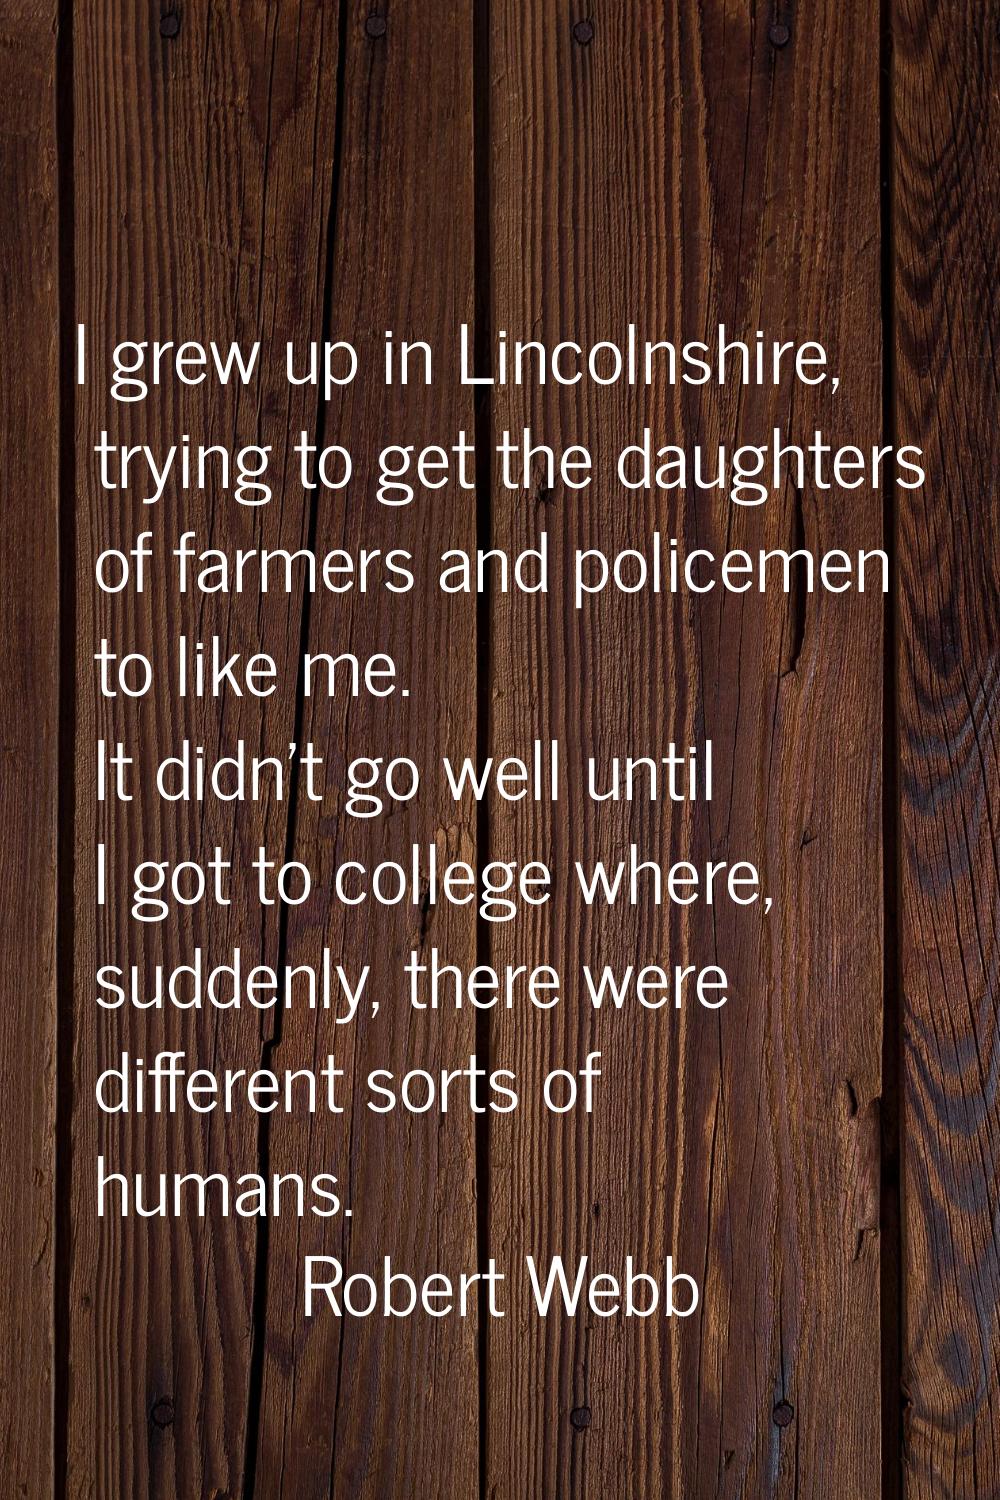 I grew up in Lincolnshire, trying to get the daughters of farmers and policemen to like me. It didn